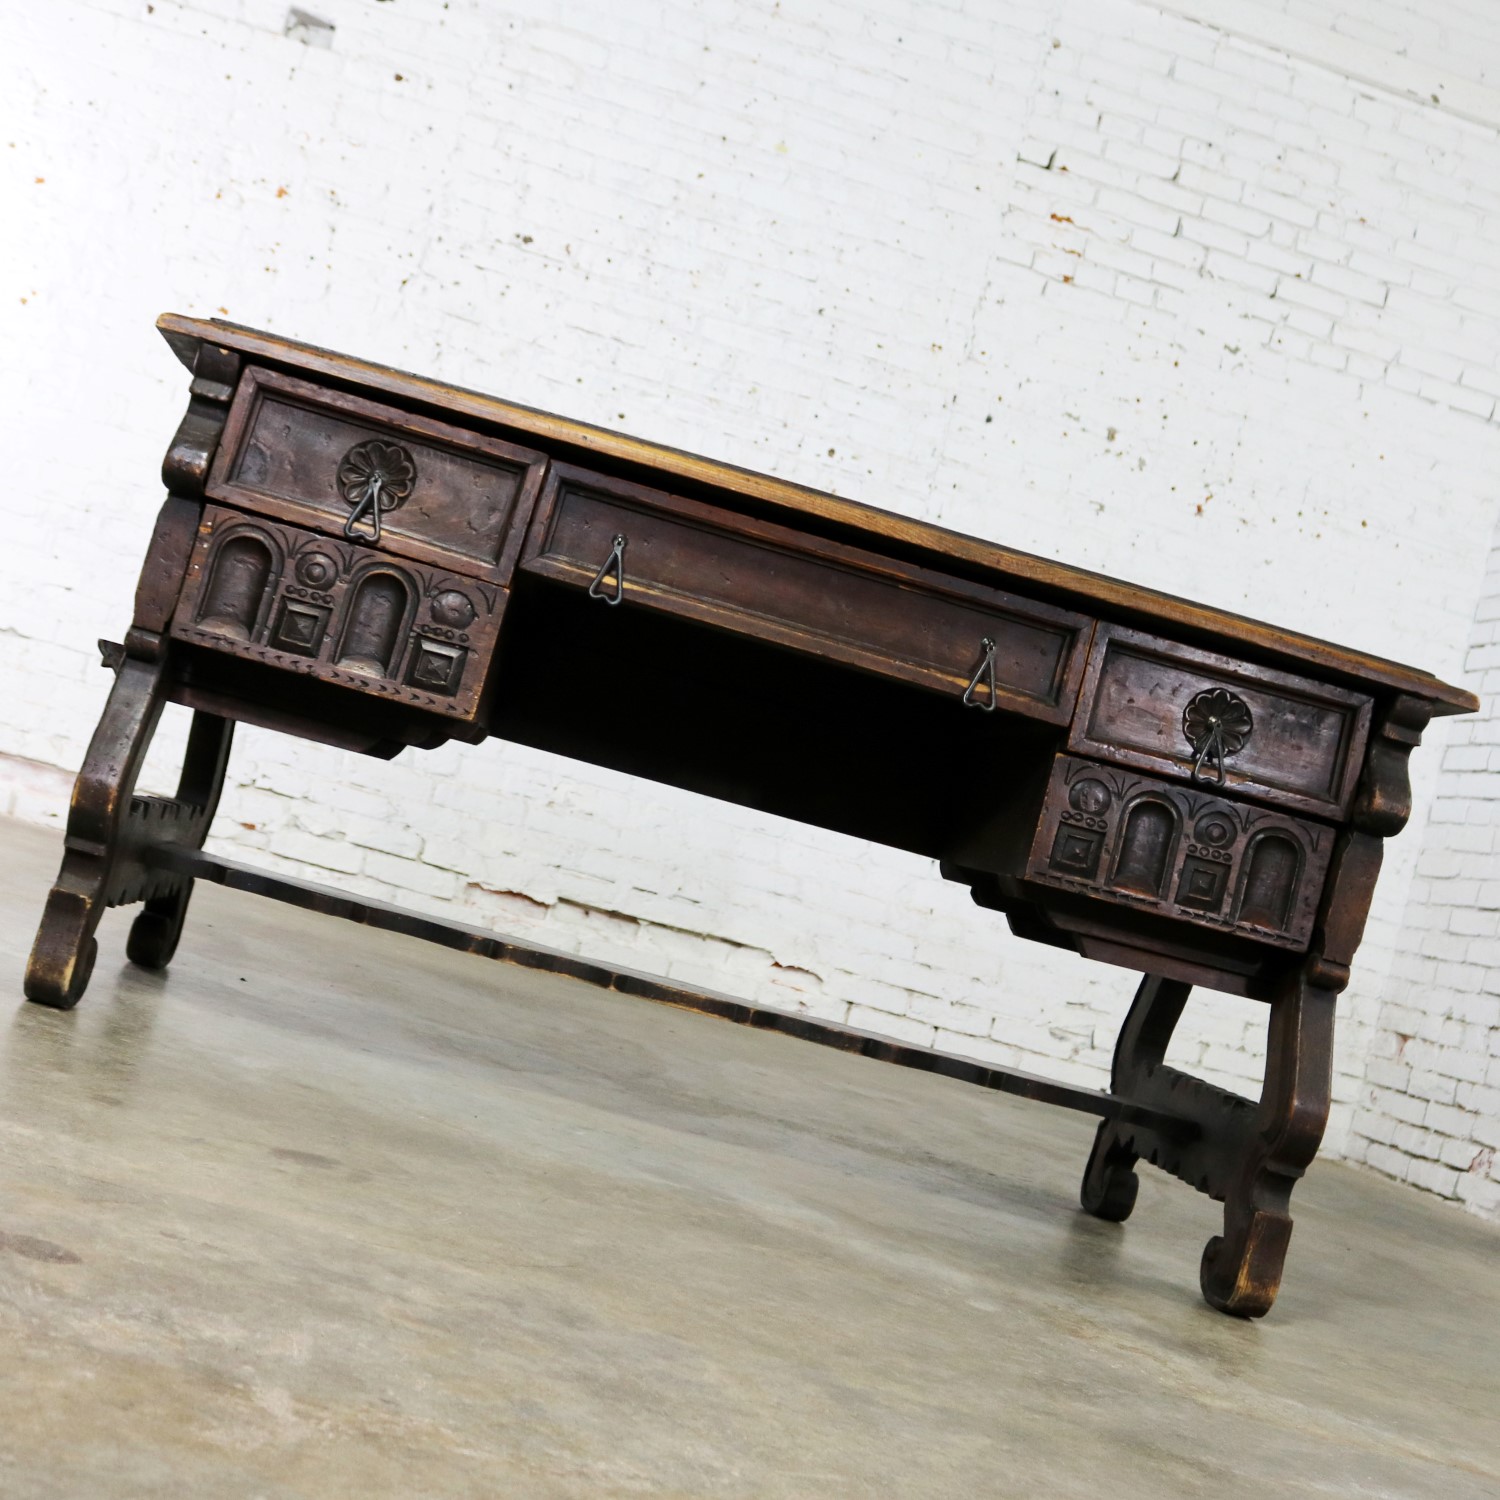 Spanish Revival Style Desk with Hand Wrought Hardware by Artes De Mexico